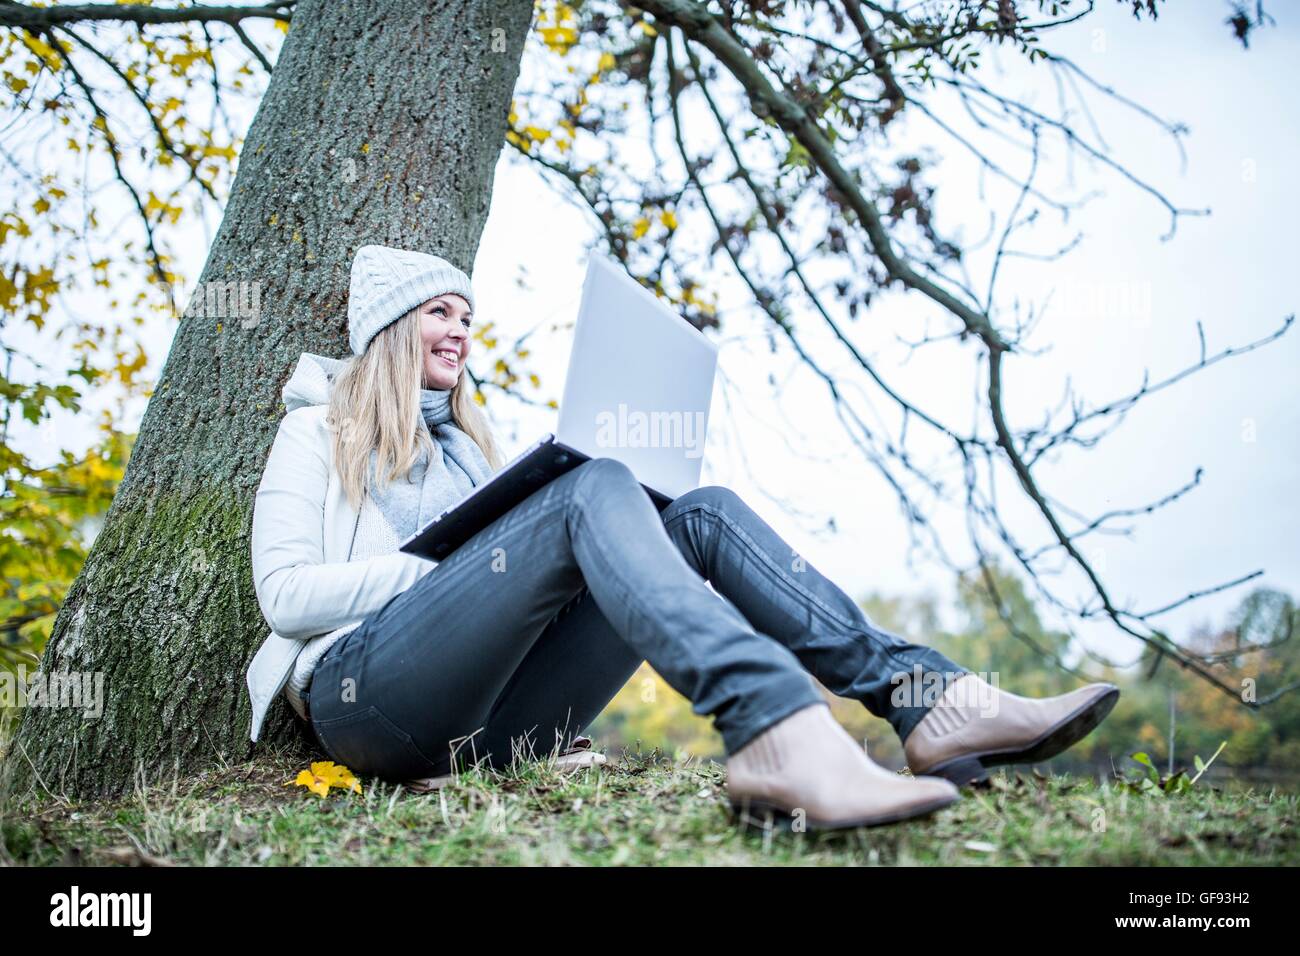 MODEL RELEASED. Young woman sitting at tree trunk and using laptop. Stock Photo